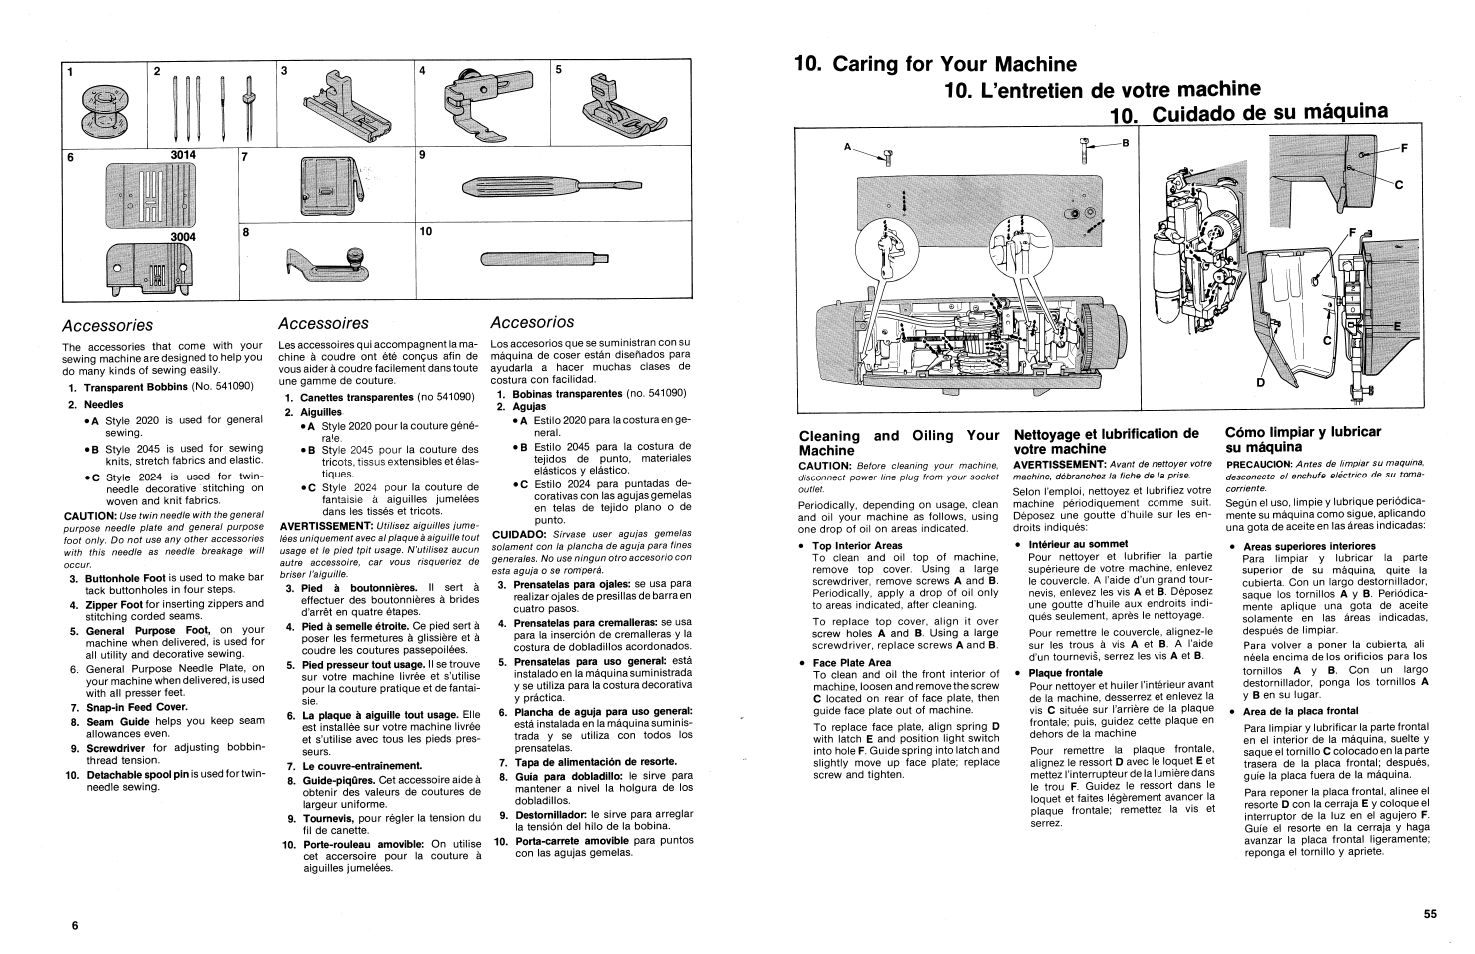 Accessories, Accessoires, Accesorios | SINGER 3014 User Manual | Page 8 / 64